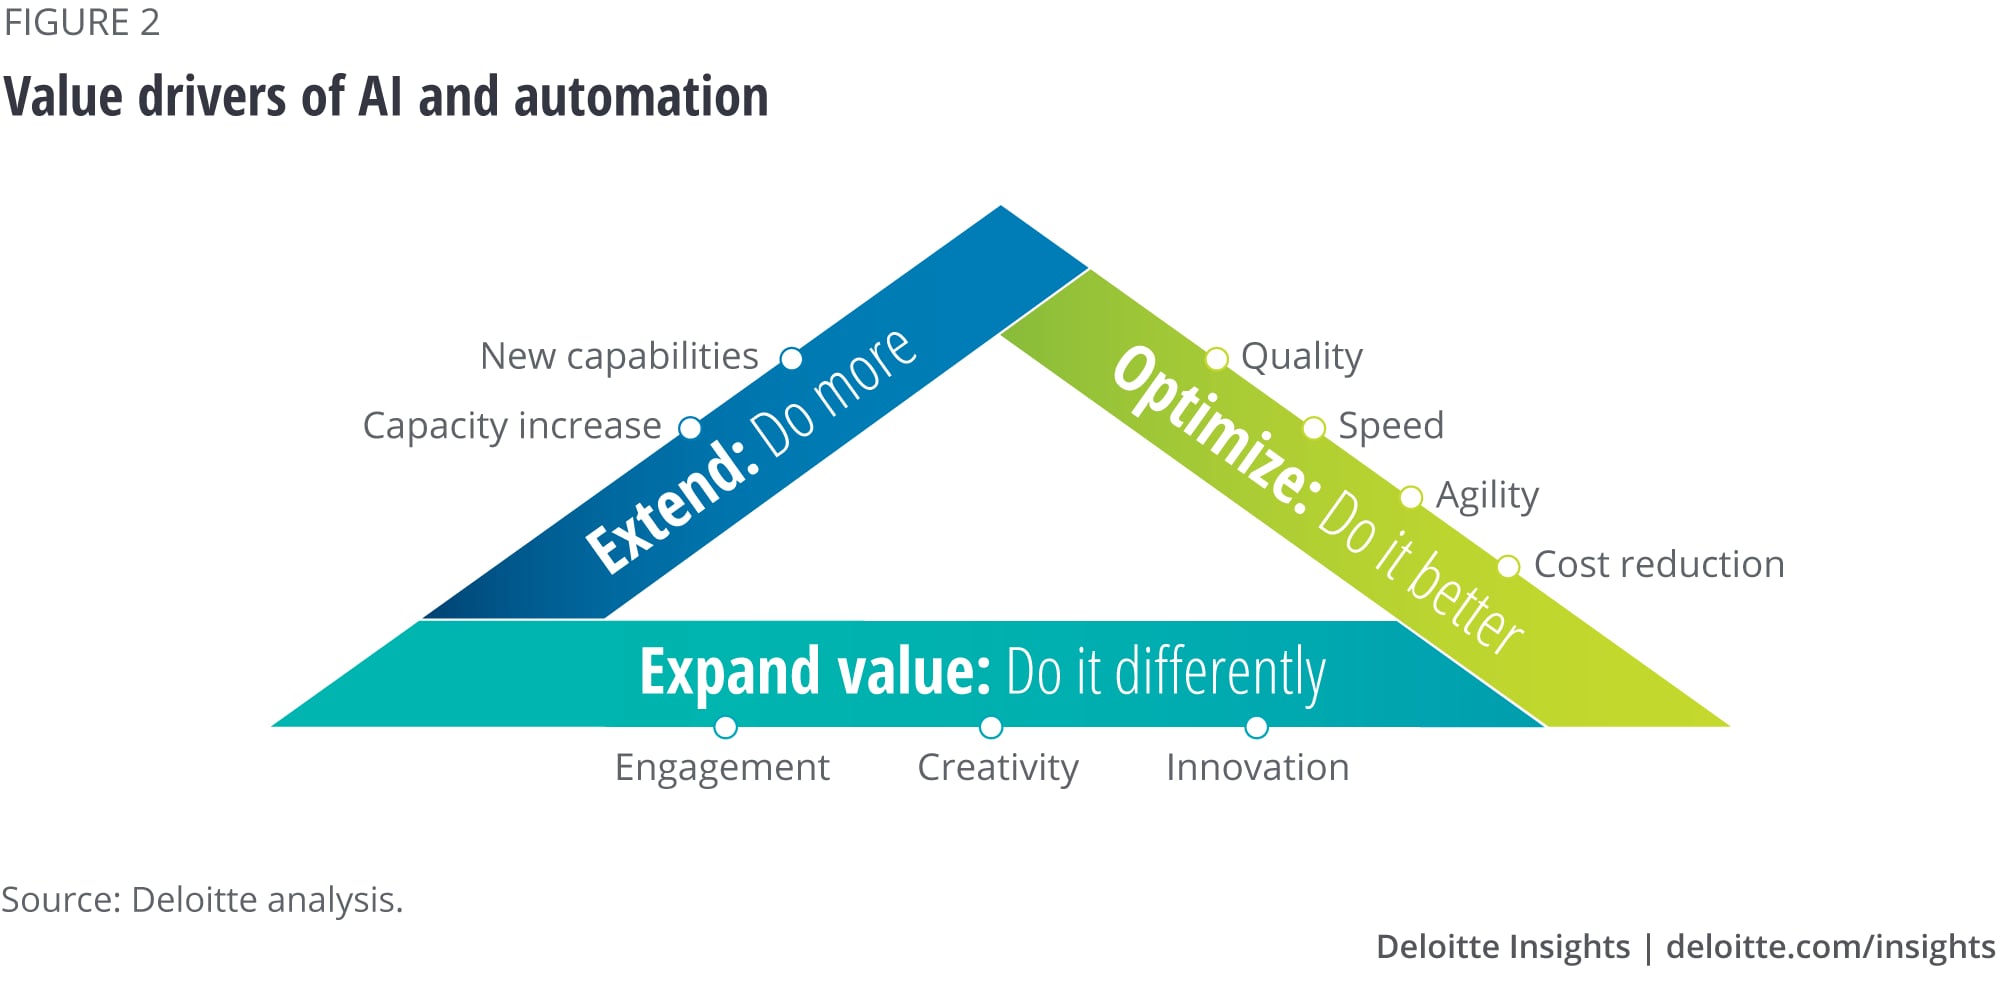 Value drivers of AI and automation